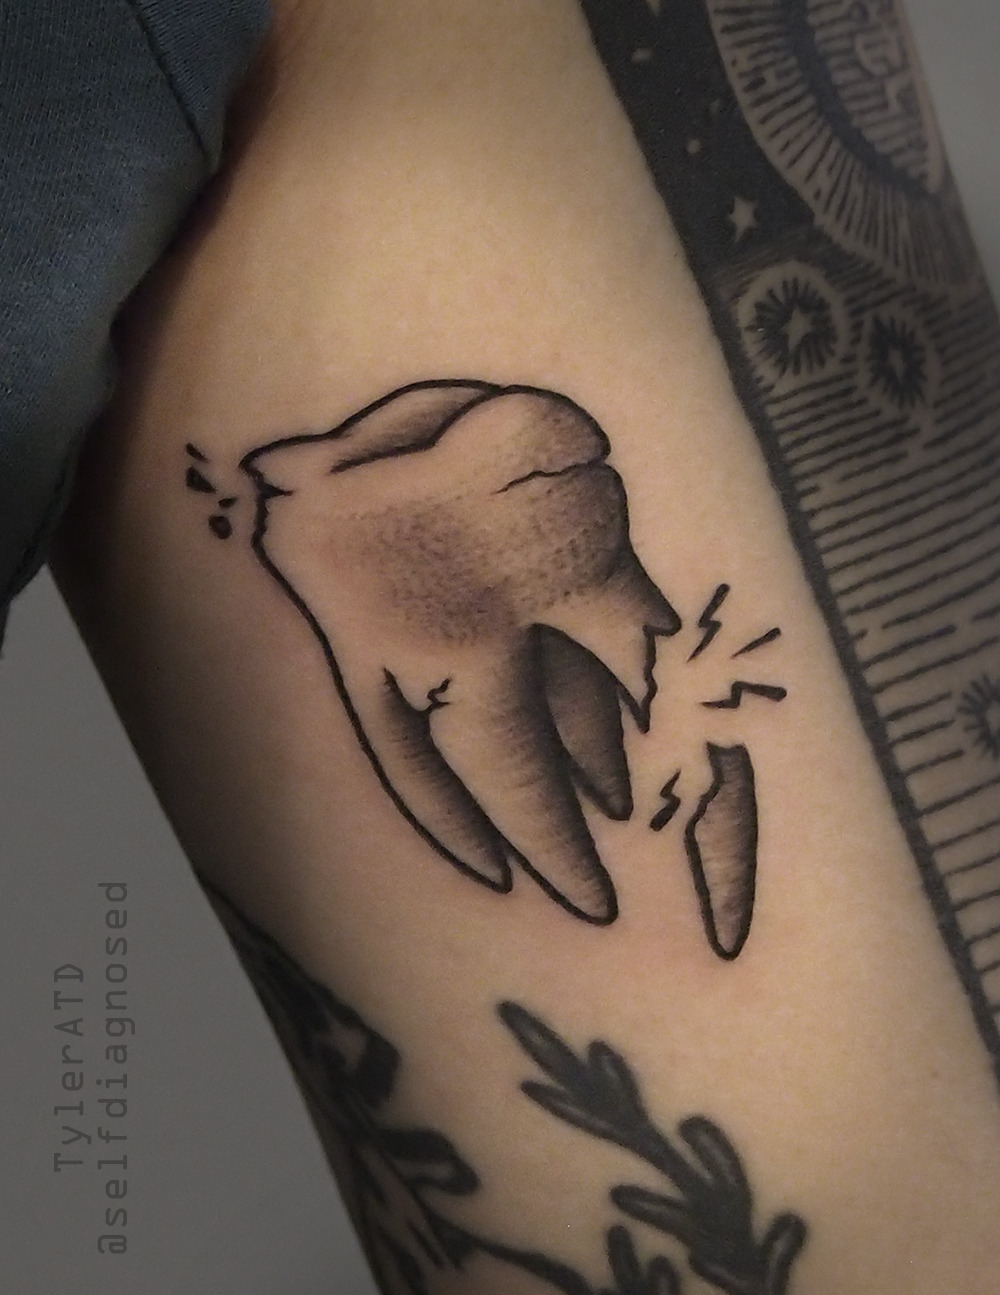 Tooth Tattoo Meaning: The Intricate Aesthetics of Tooth Tattoos